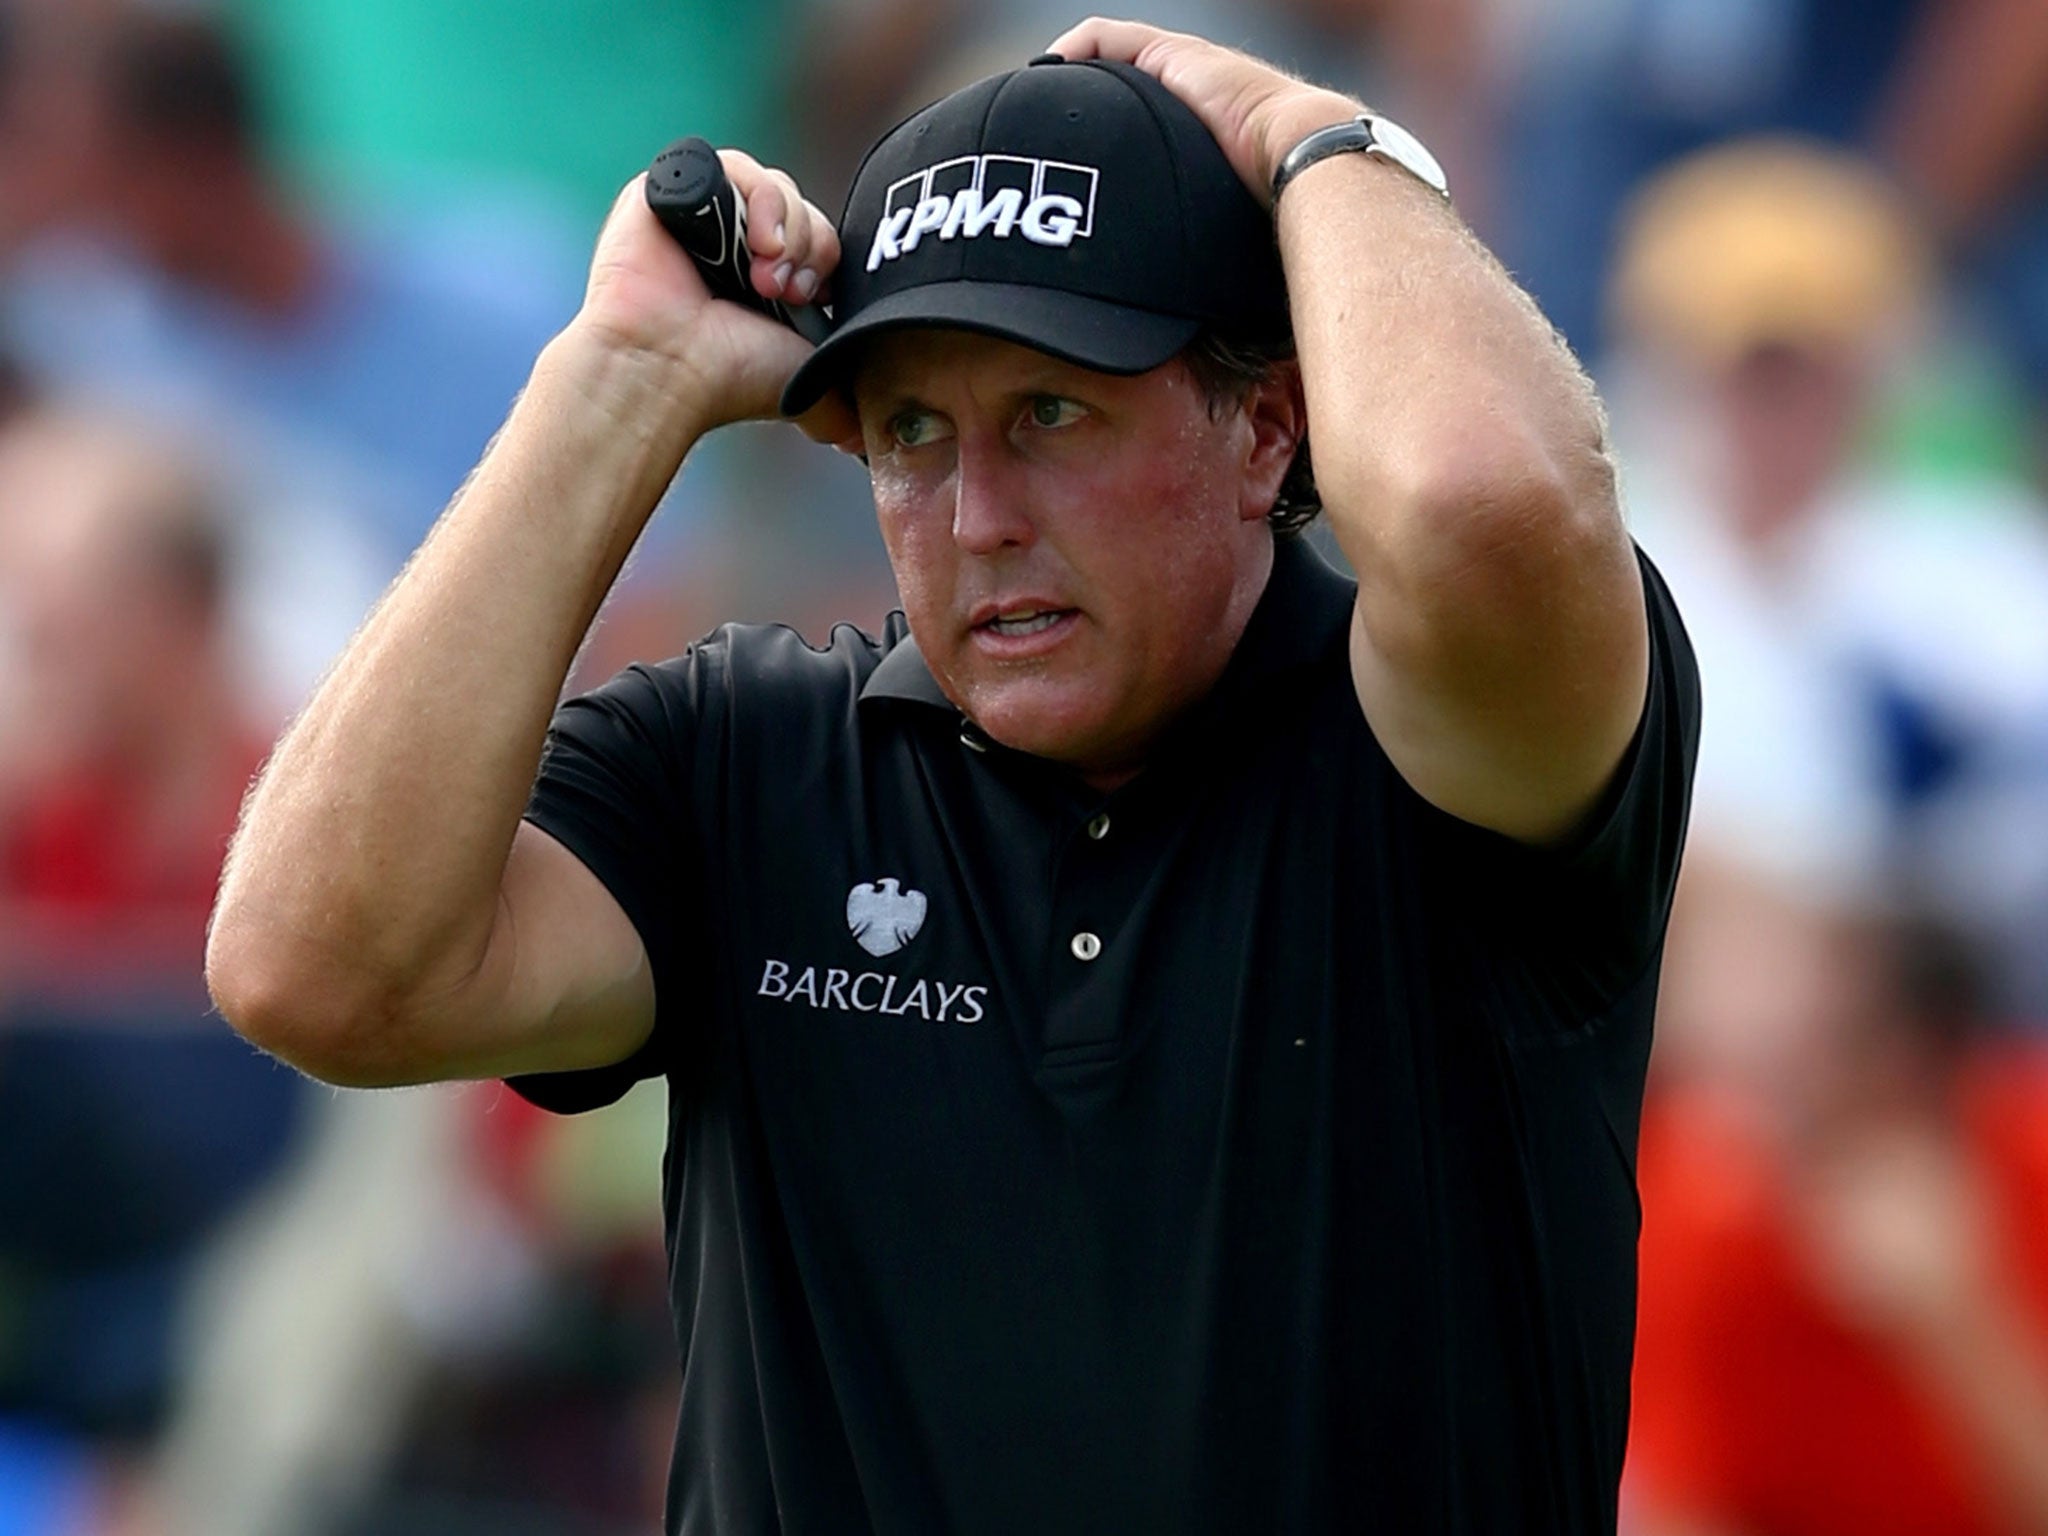 Phil Mickelson reacts after narrowly missing an eagle putt on the tenth